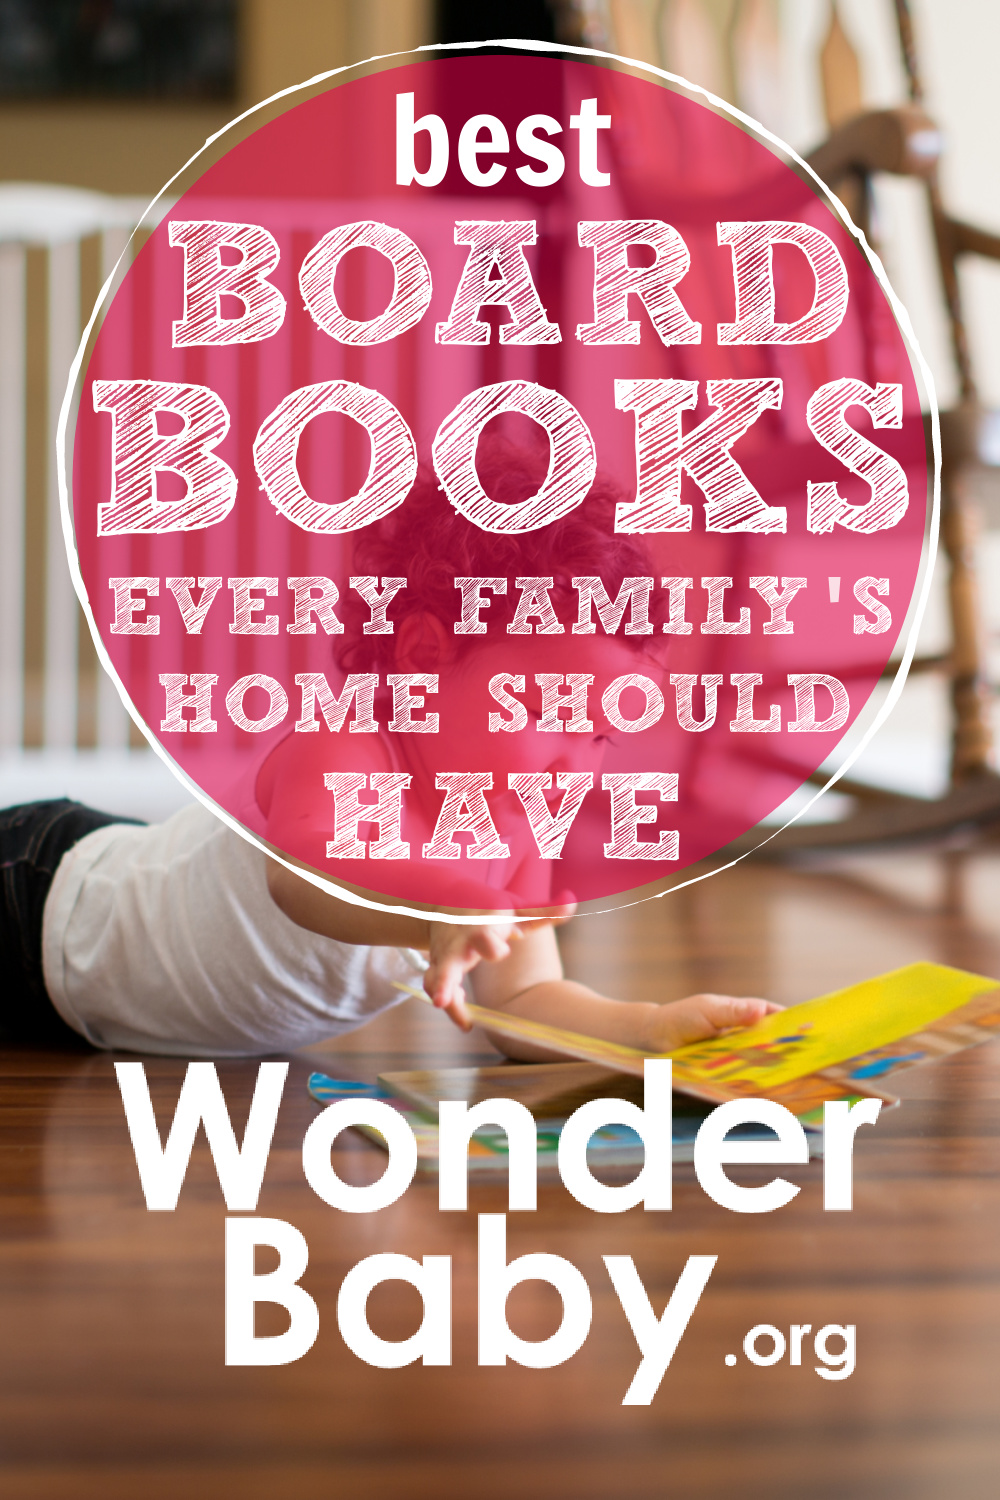 The 11 Best Board Books Every Family’s Home Should Have